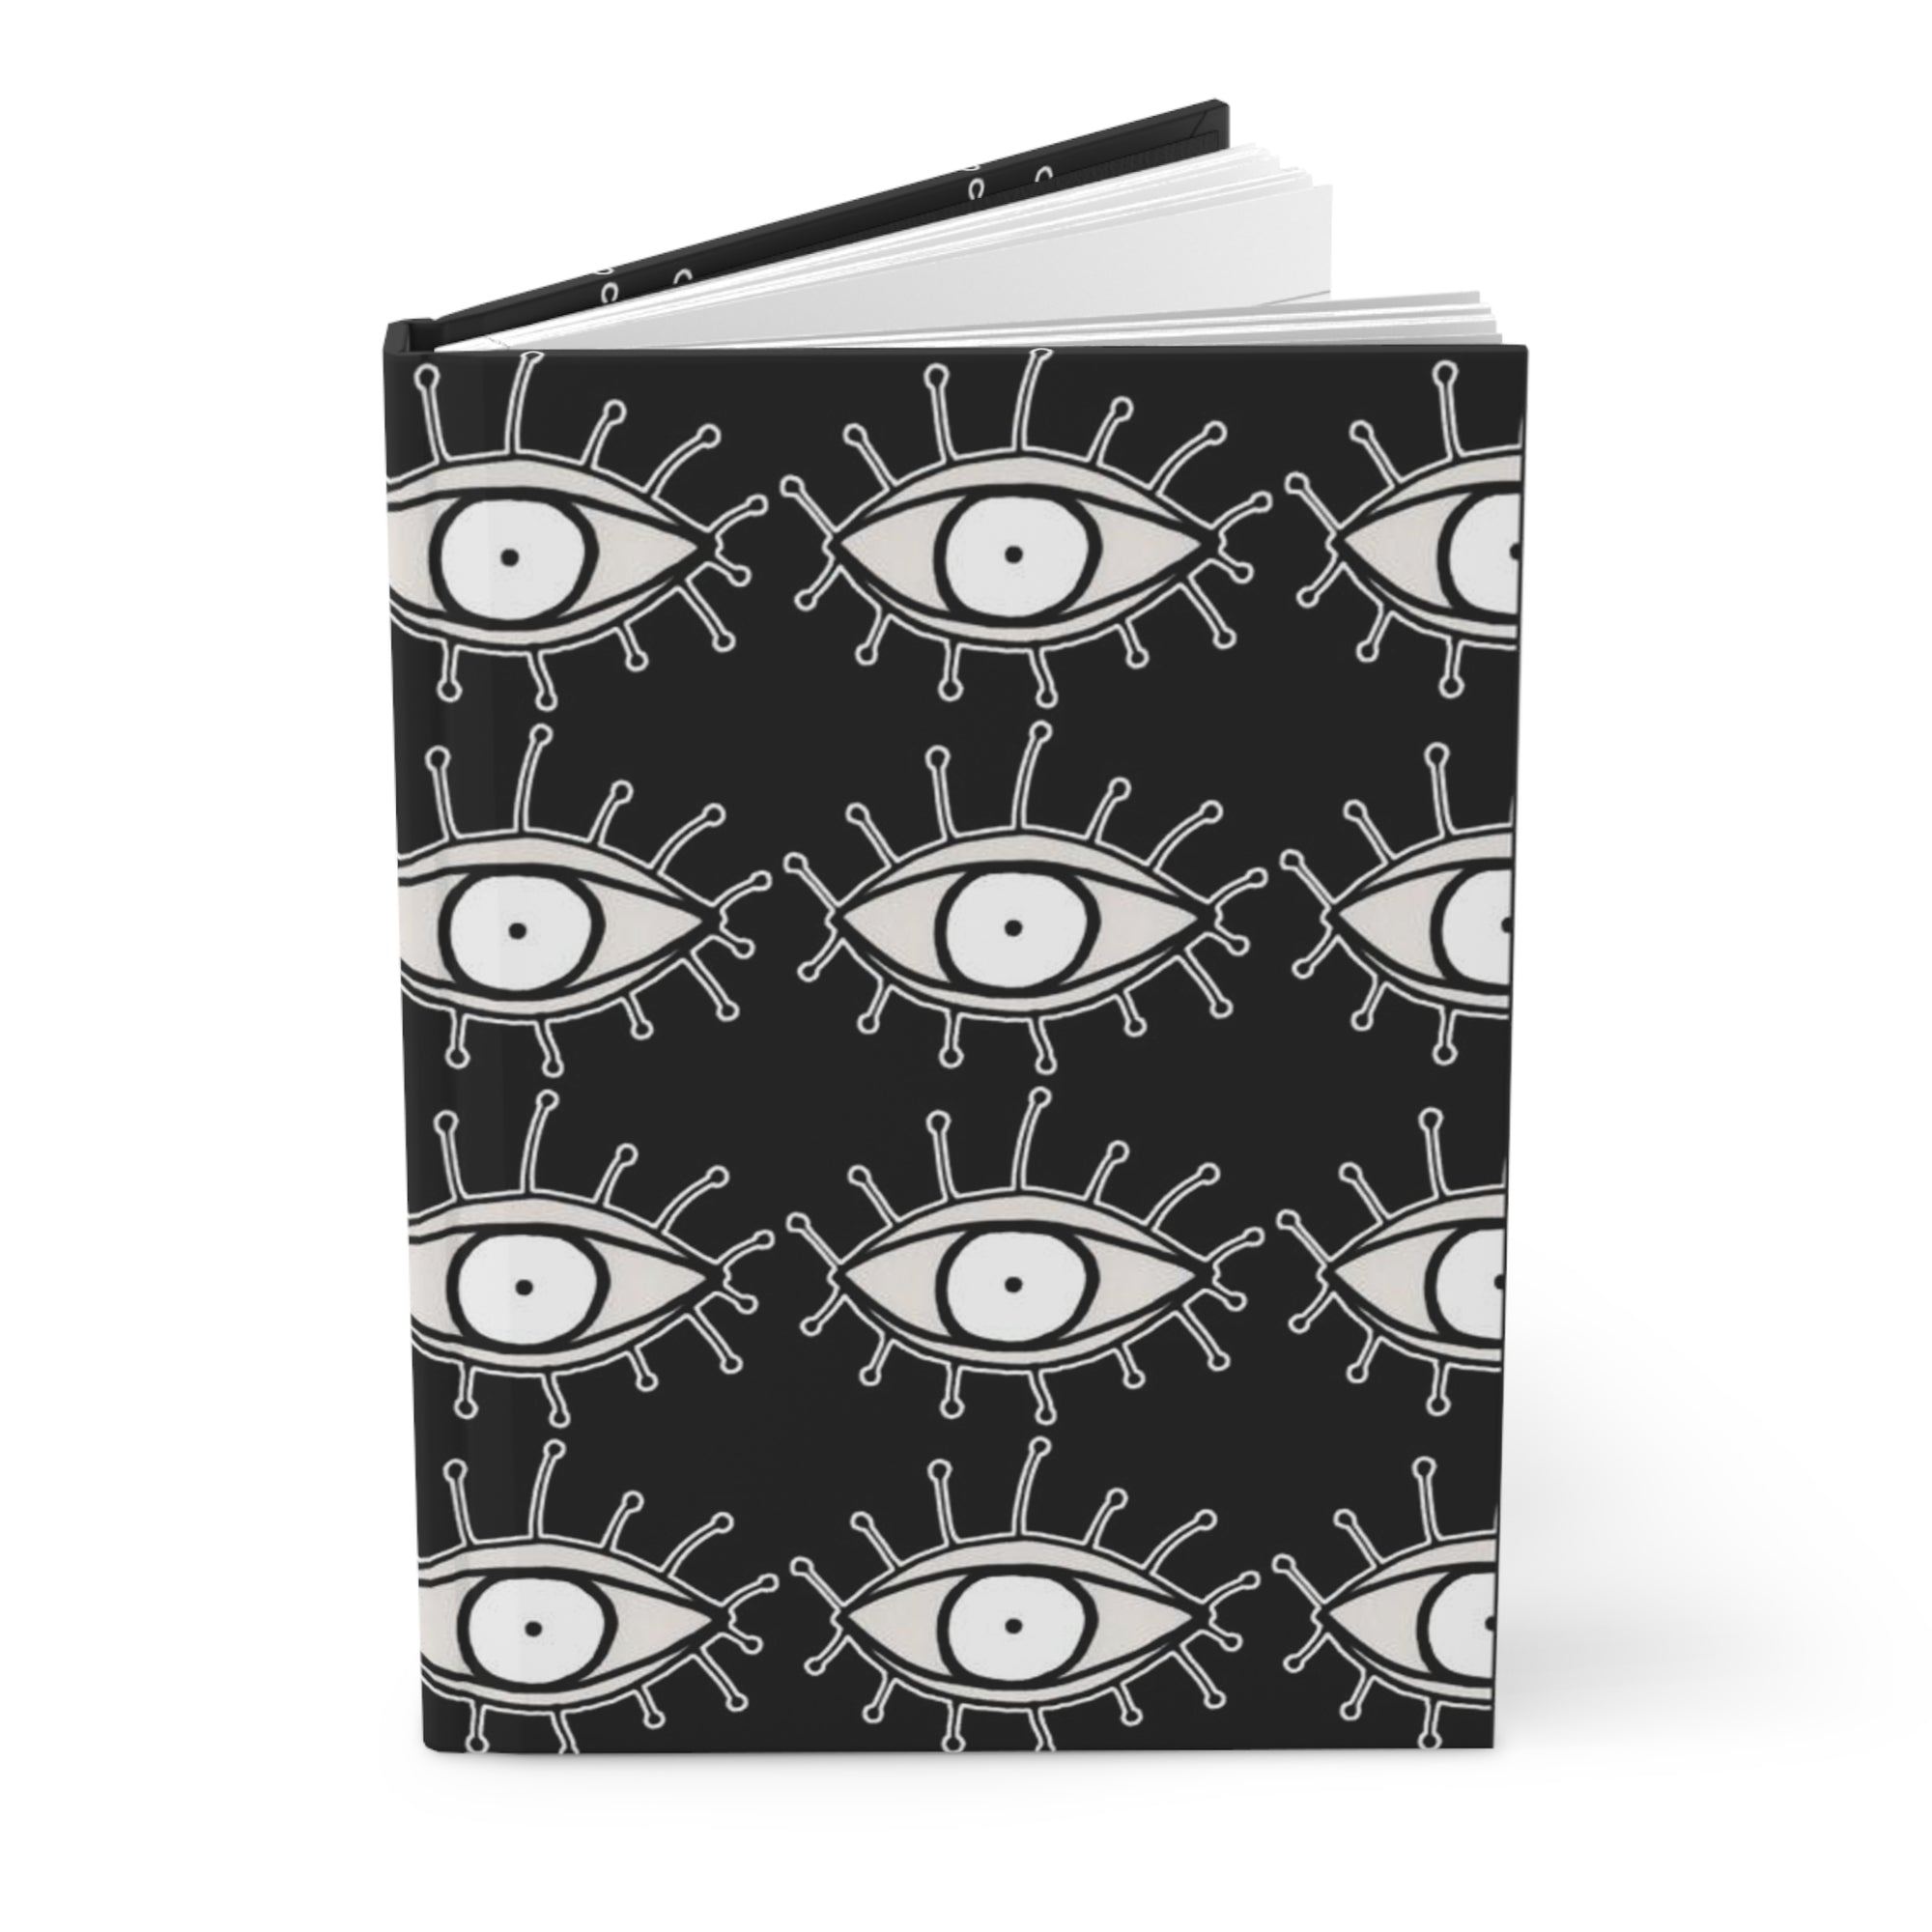 Eyes on Hardcover Black and White Journal "Lashes"